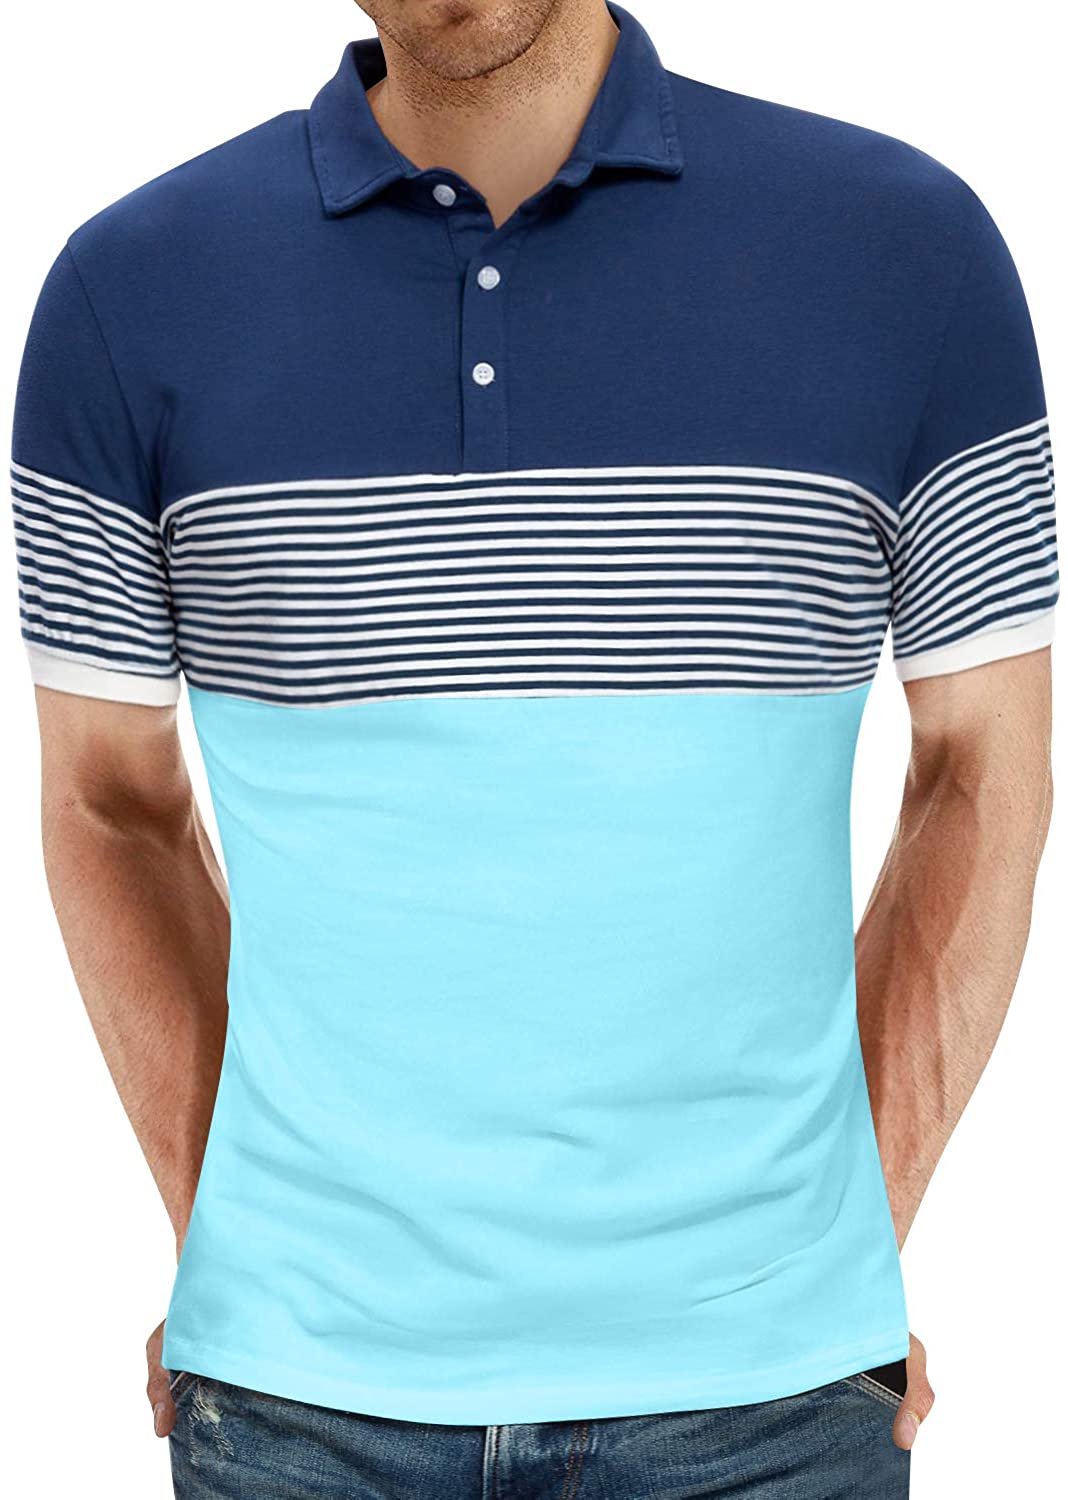 YTD Men's Short Sleeve Polo Shirts Casual Slim Fit Contrast Color Stitching Stripe Cotton Shirts